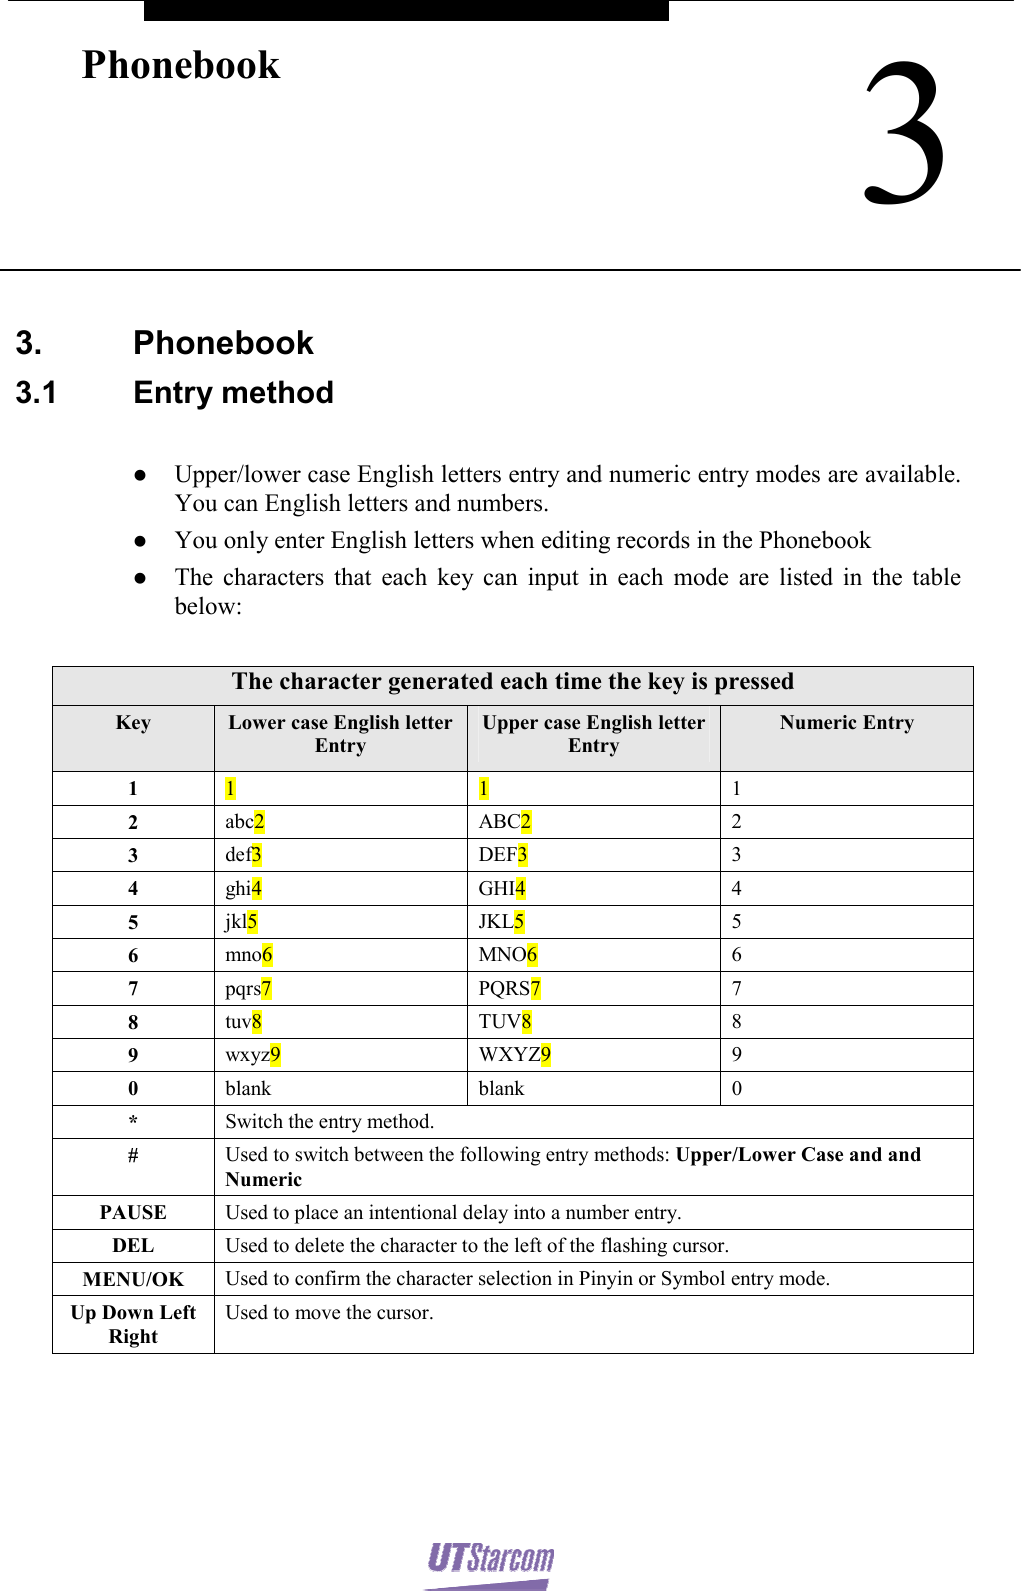    3Phonebook  3. Phonebook 3.1 Entry method  z Upper/lower case English letters entry and numeric entry modes are available. You can English letters and numbers. z You only enter English letters when editing records in the Phonebook z The characters that each key can input in each mode are listed in the table below:  The character generated each time the key is pressed Key  Lower case English letter Entry Upper case English letter Entry Numeric Entry 1                1  1 1 2  abc2  ABC2 2 3  def3  DEF3 3 4  ghi4  GHI4 4 5  jkl5  JKL5 5 6  mno6  MNO6 6 7  pqrs7  PQRS7 7 8  tuv8  TUV8 8 9  wxyz9  WXYZ9 9 0  blank blank 0 *  Switch the entry method. #  Used to switch between the following entry methods: Upper/Lower Case and and Numeric PAUSE  Used to place an intentional delay into a number entry. DEL  Used to delete the character to the left of the flashing cursor. MENU/OK  Used to confirm the character selection in Pinyin or Symbol entry mode. Up Down Left Right Used to move the cursor.     